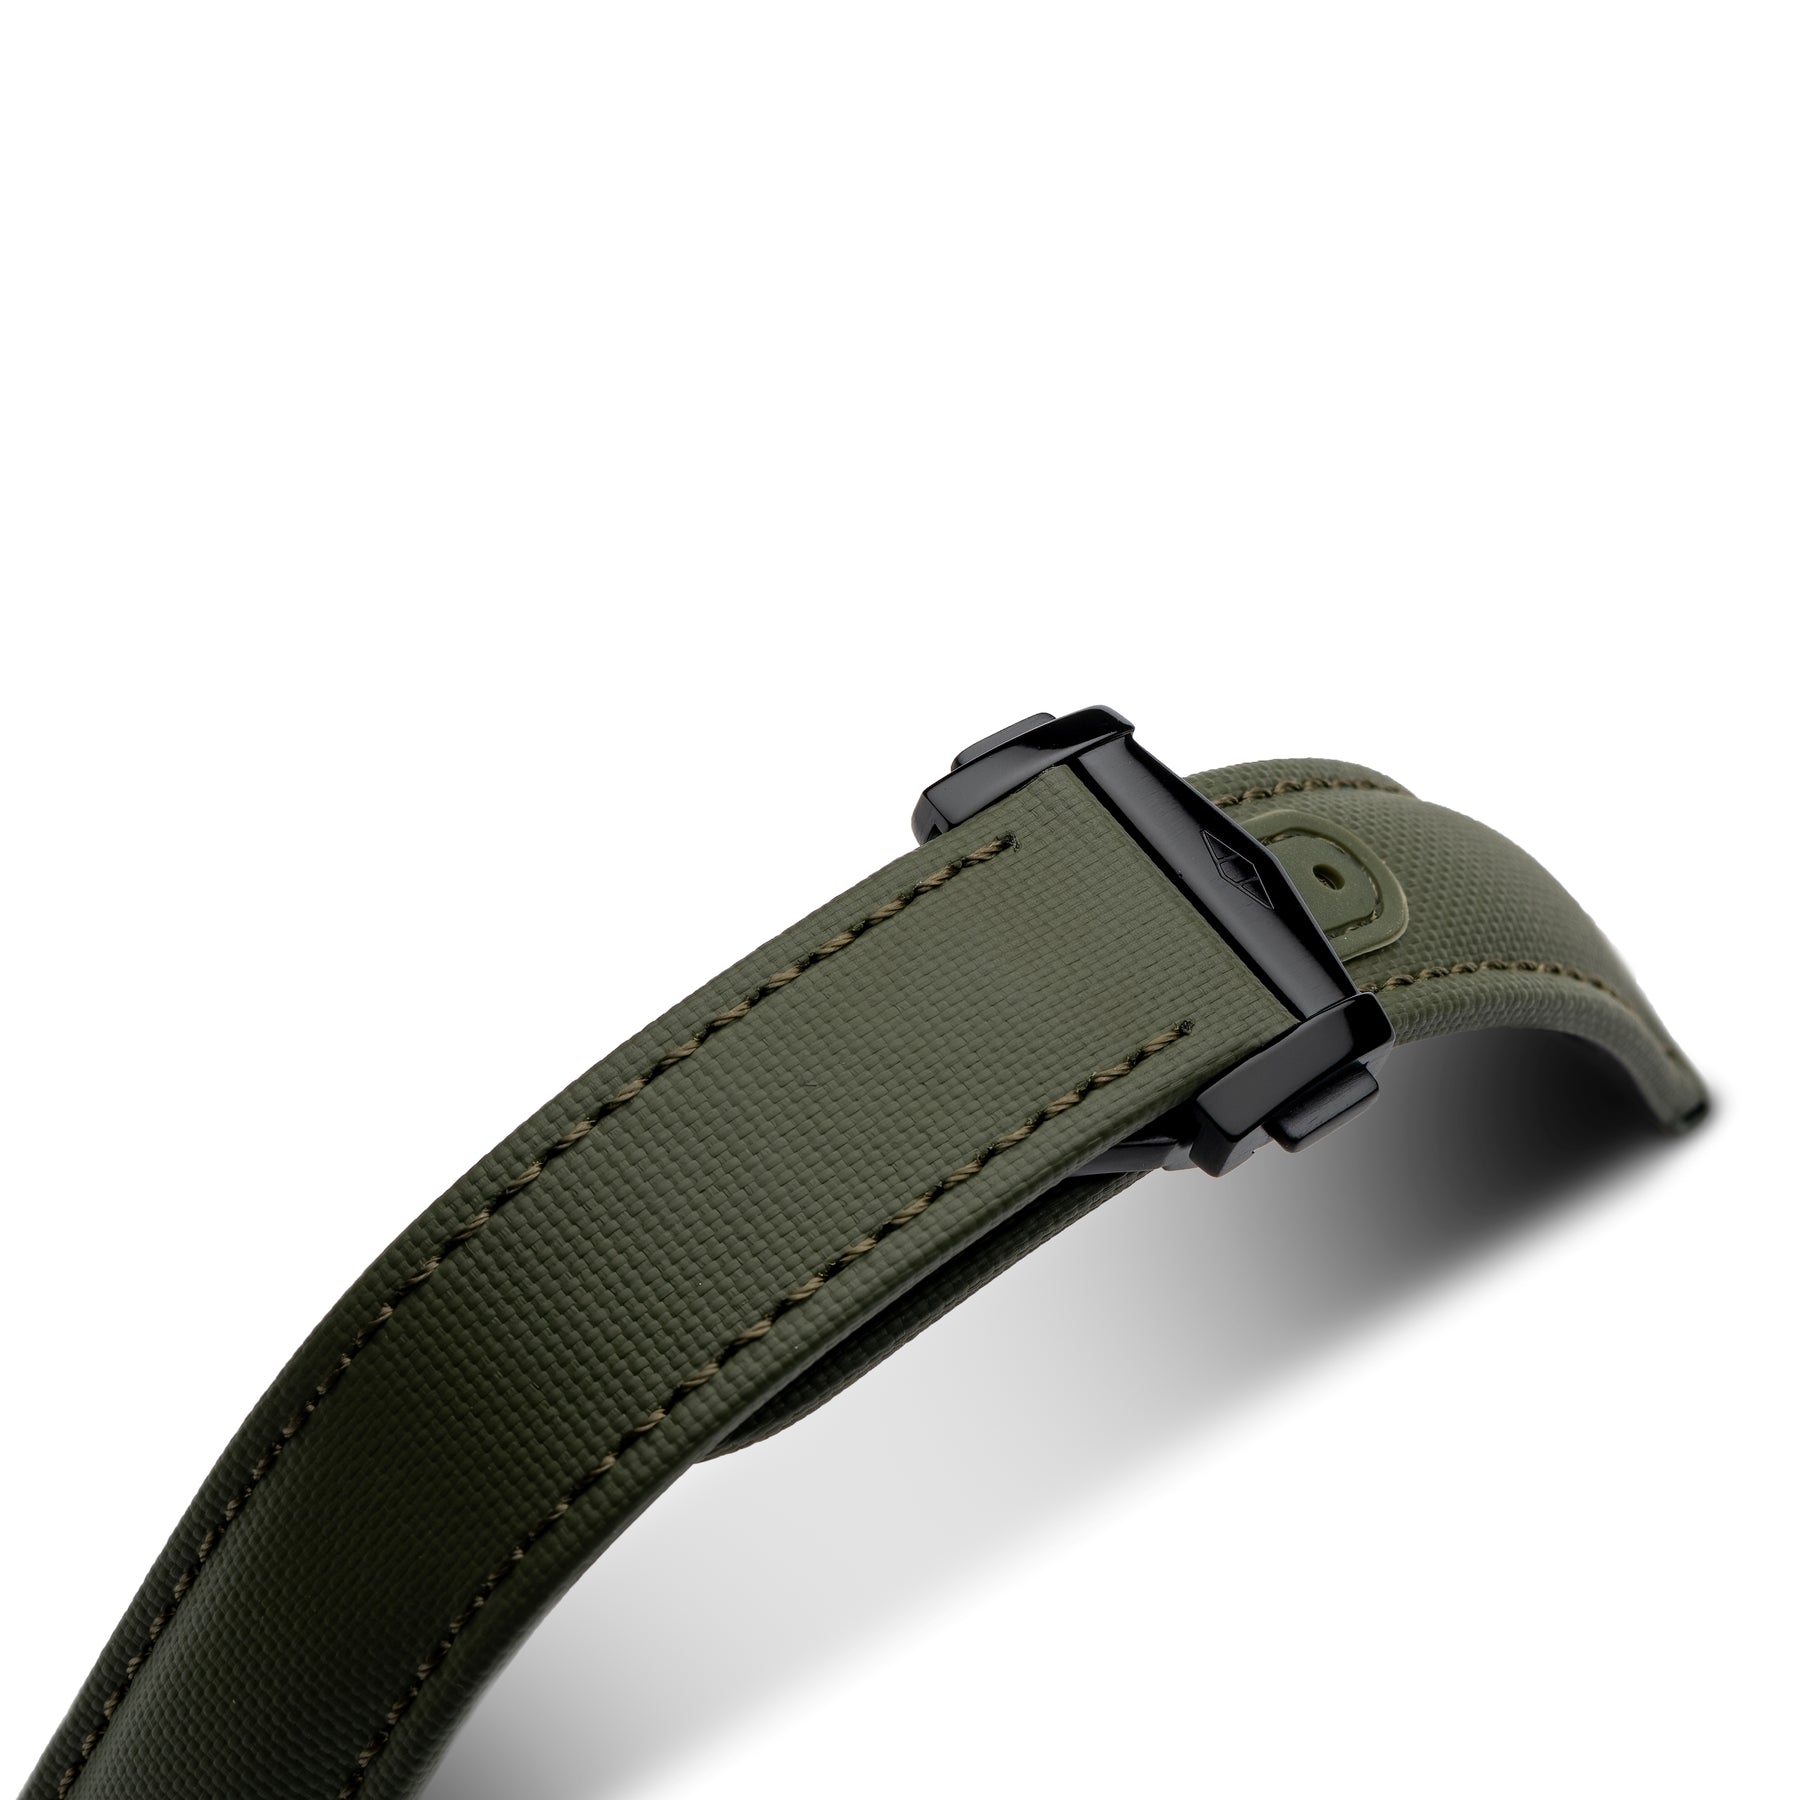 Loop-Less Khaki Green Sailcloth Watch Strap with Green Stitching